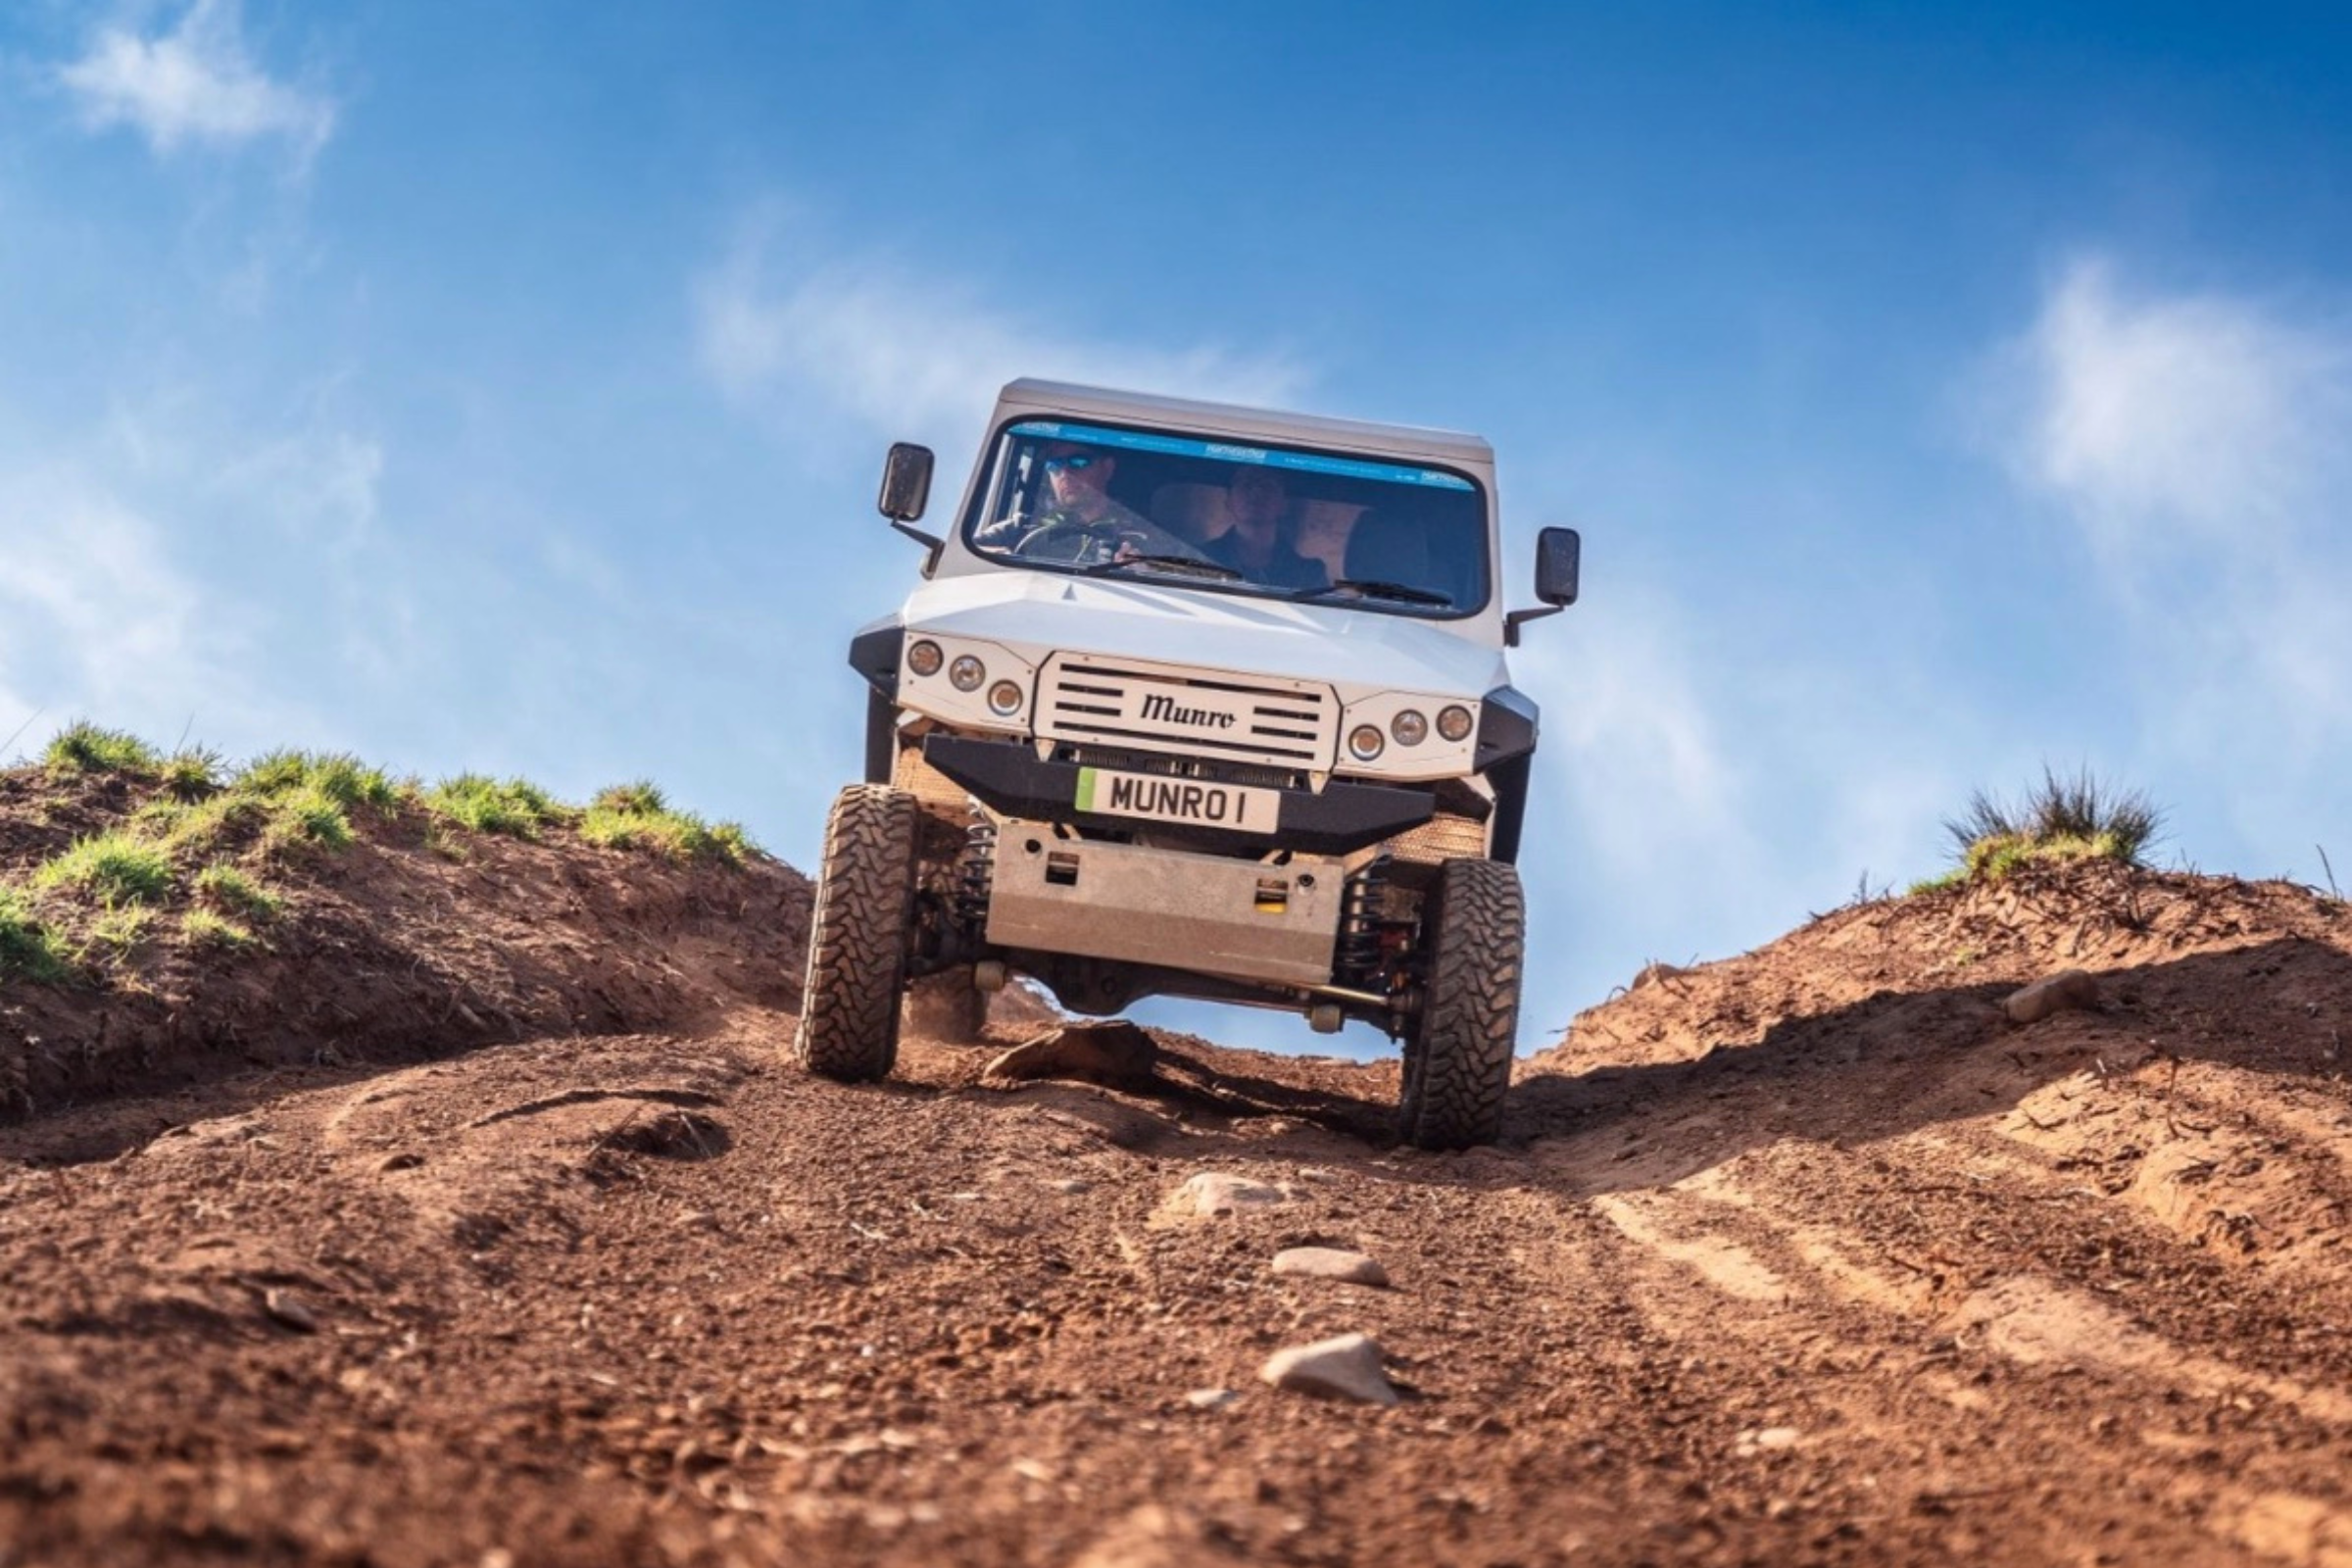 Check out the electric 4×4 called the Munro MK_1